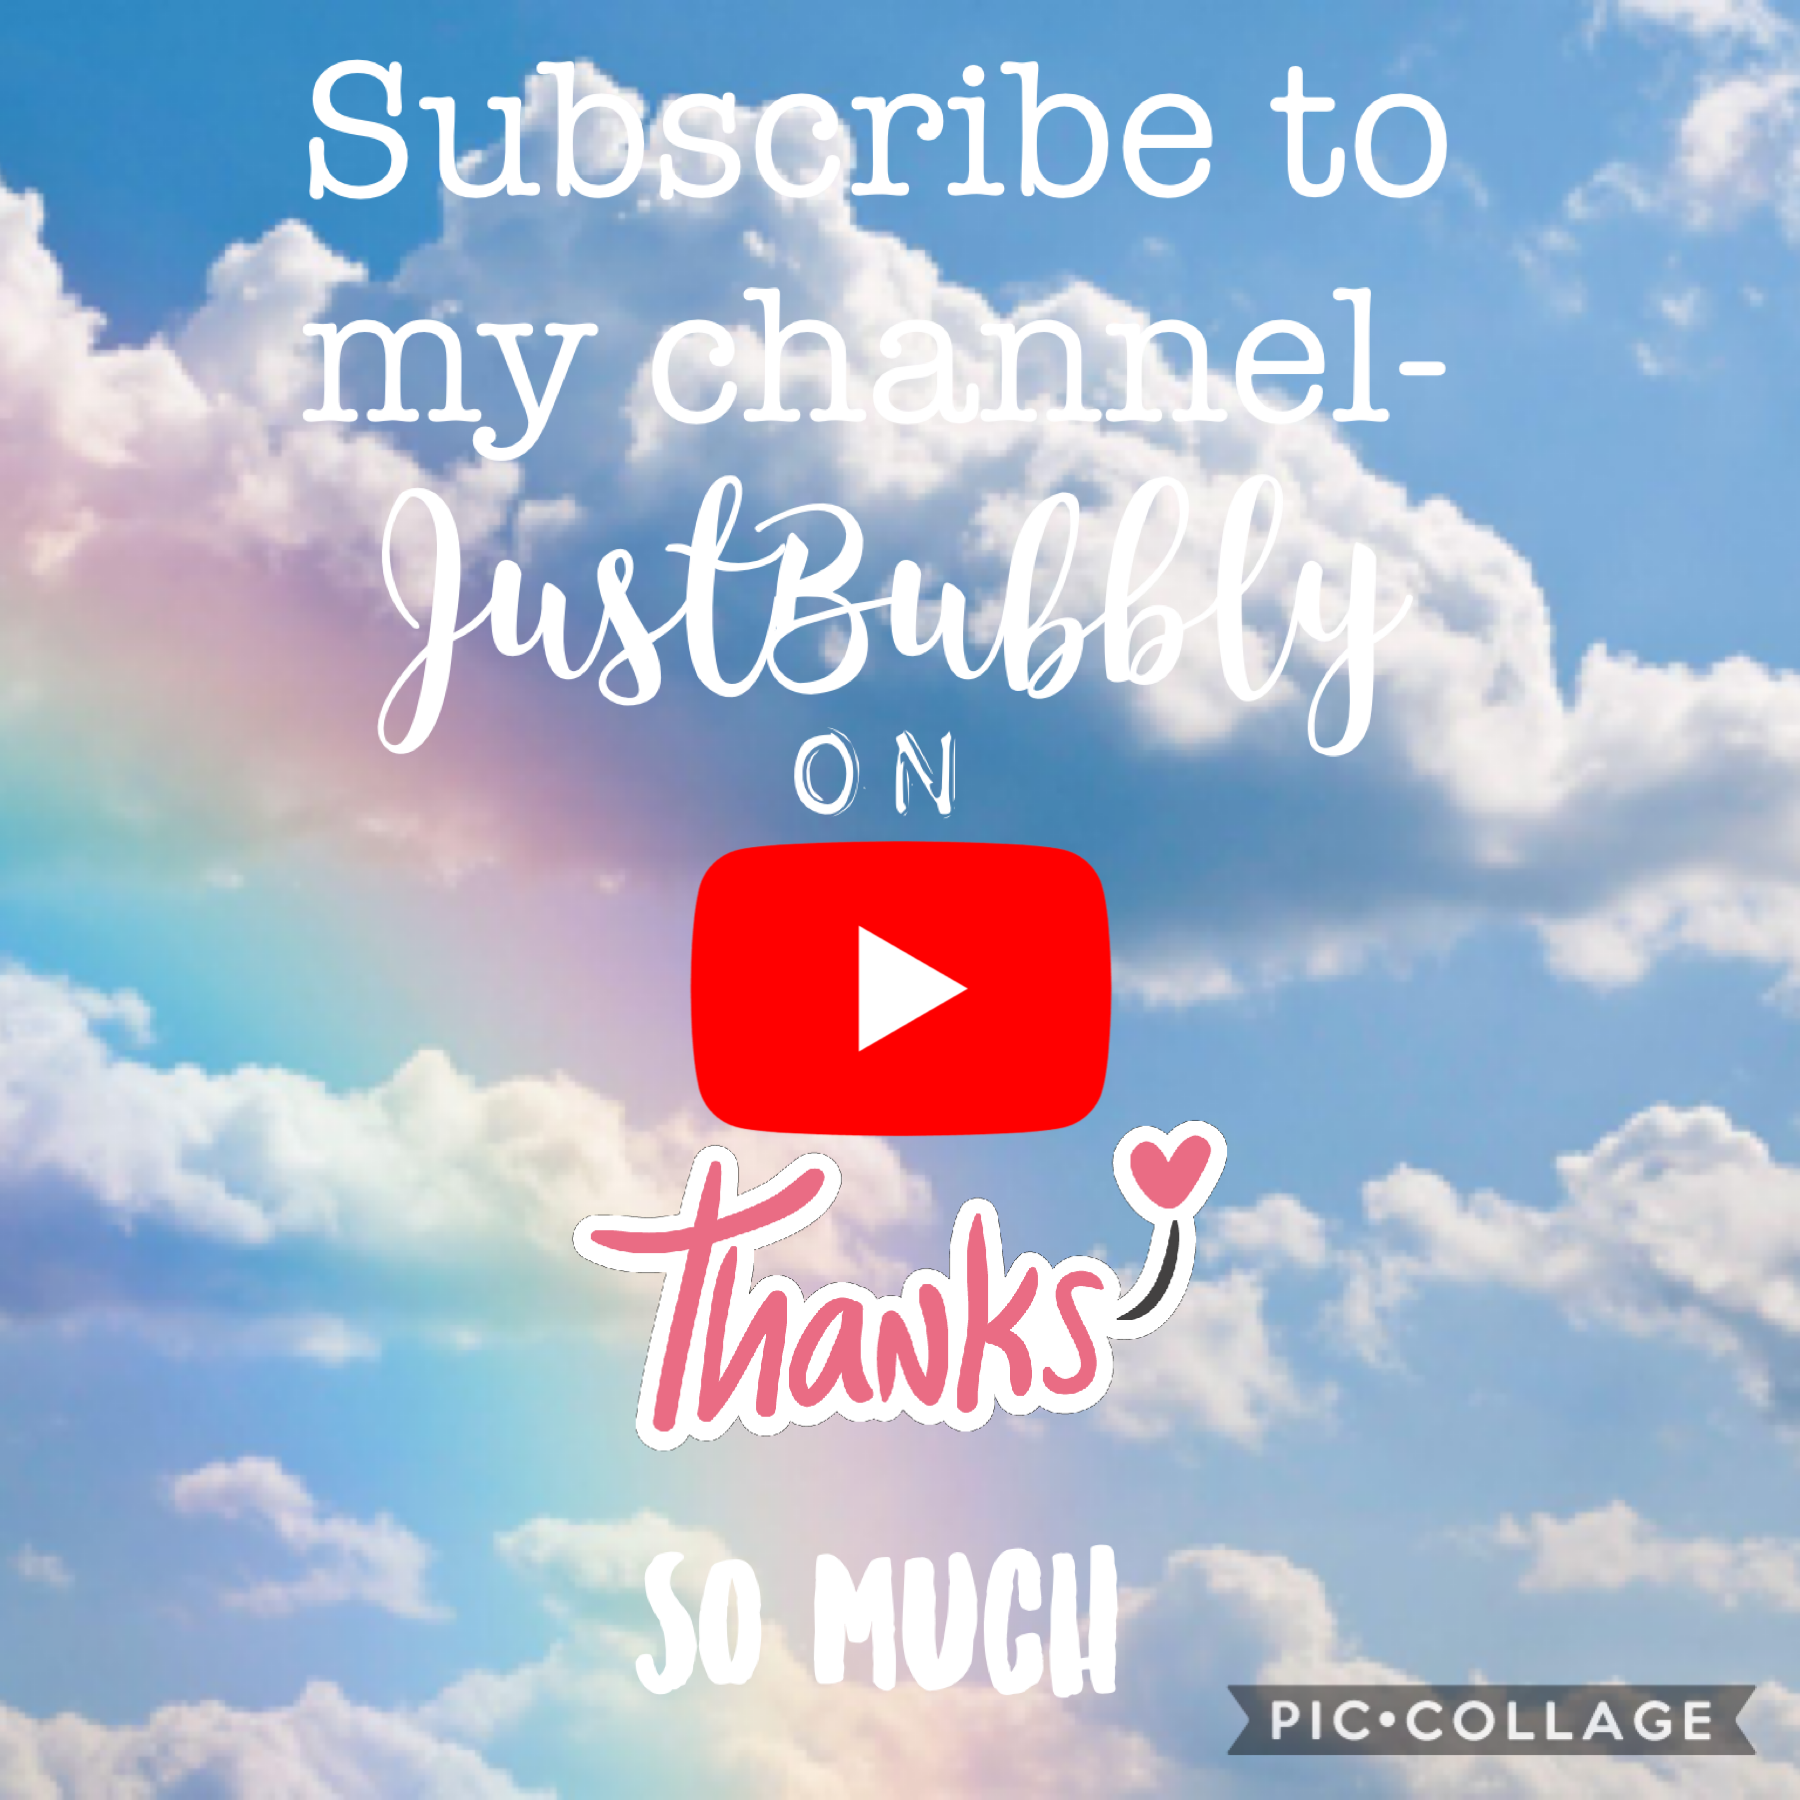 Subscribe to my YouTube channel JustBubbly! It would be most appreciated ♡